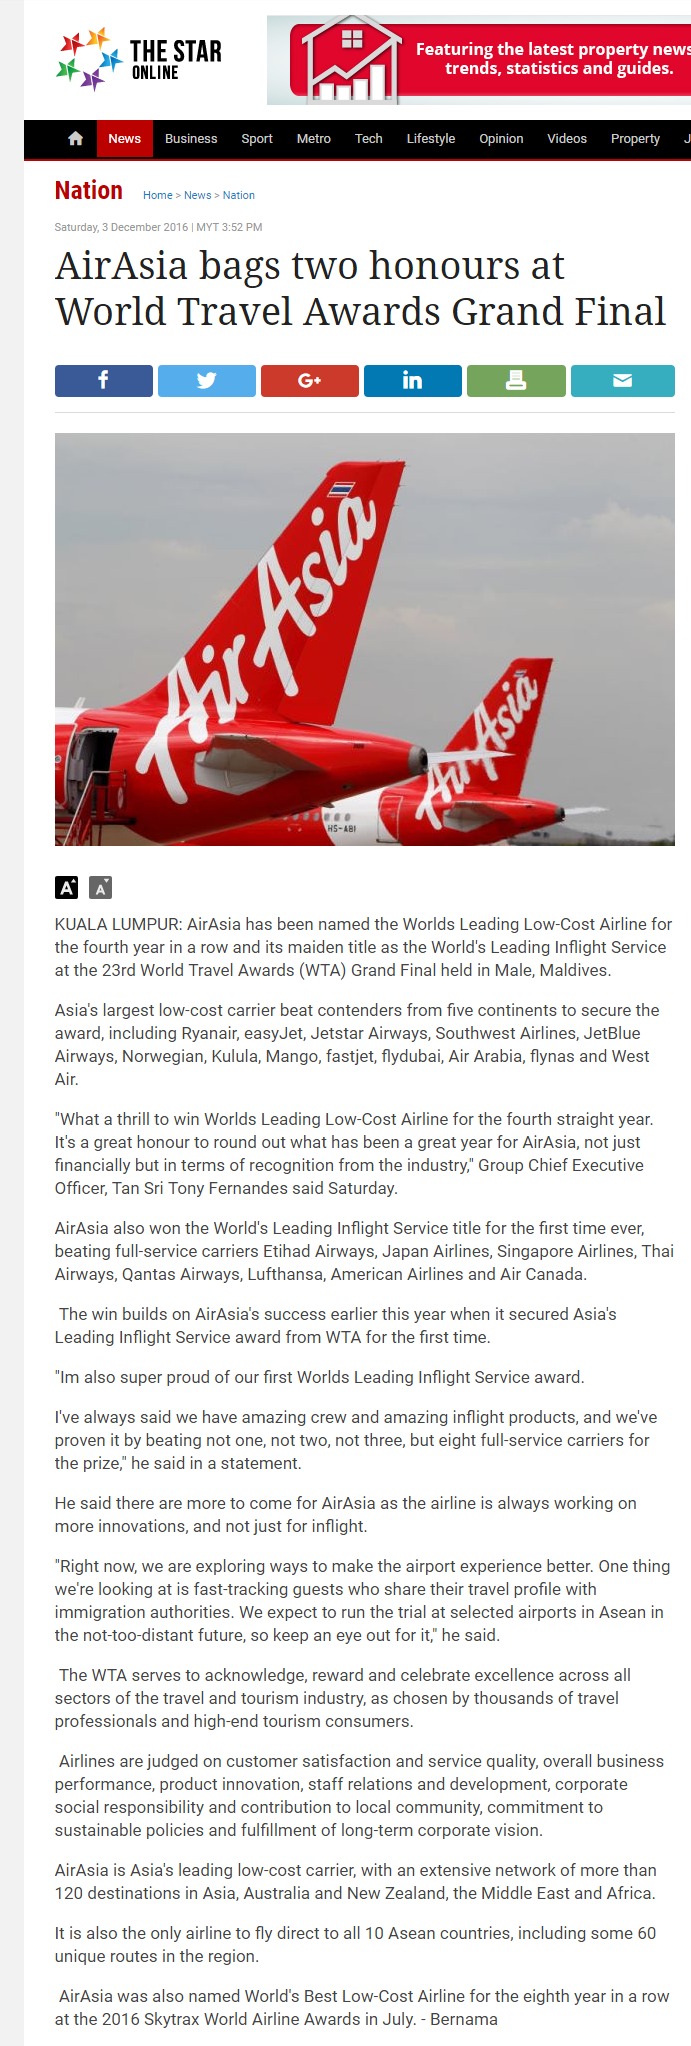 AirAsia bags two honours at World Travel Awards Grand Final